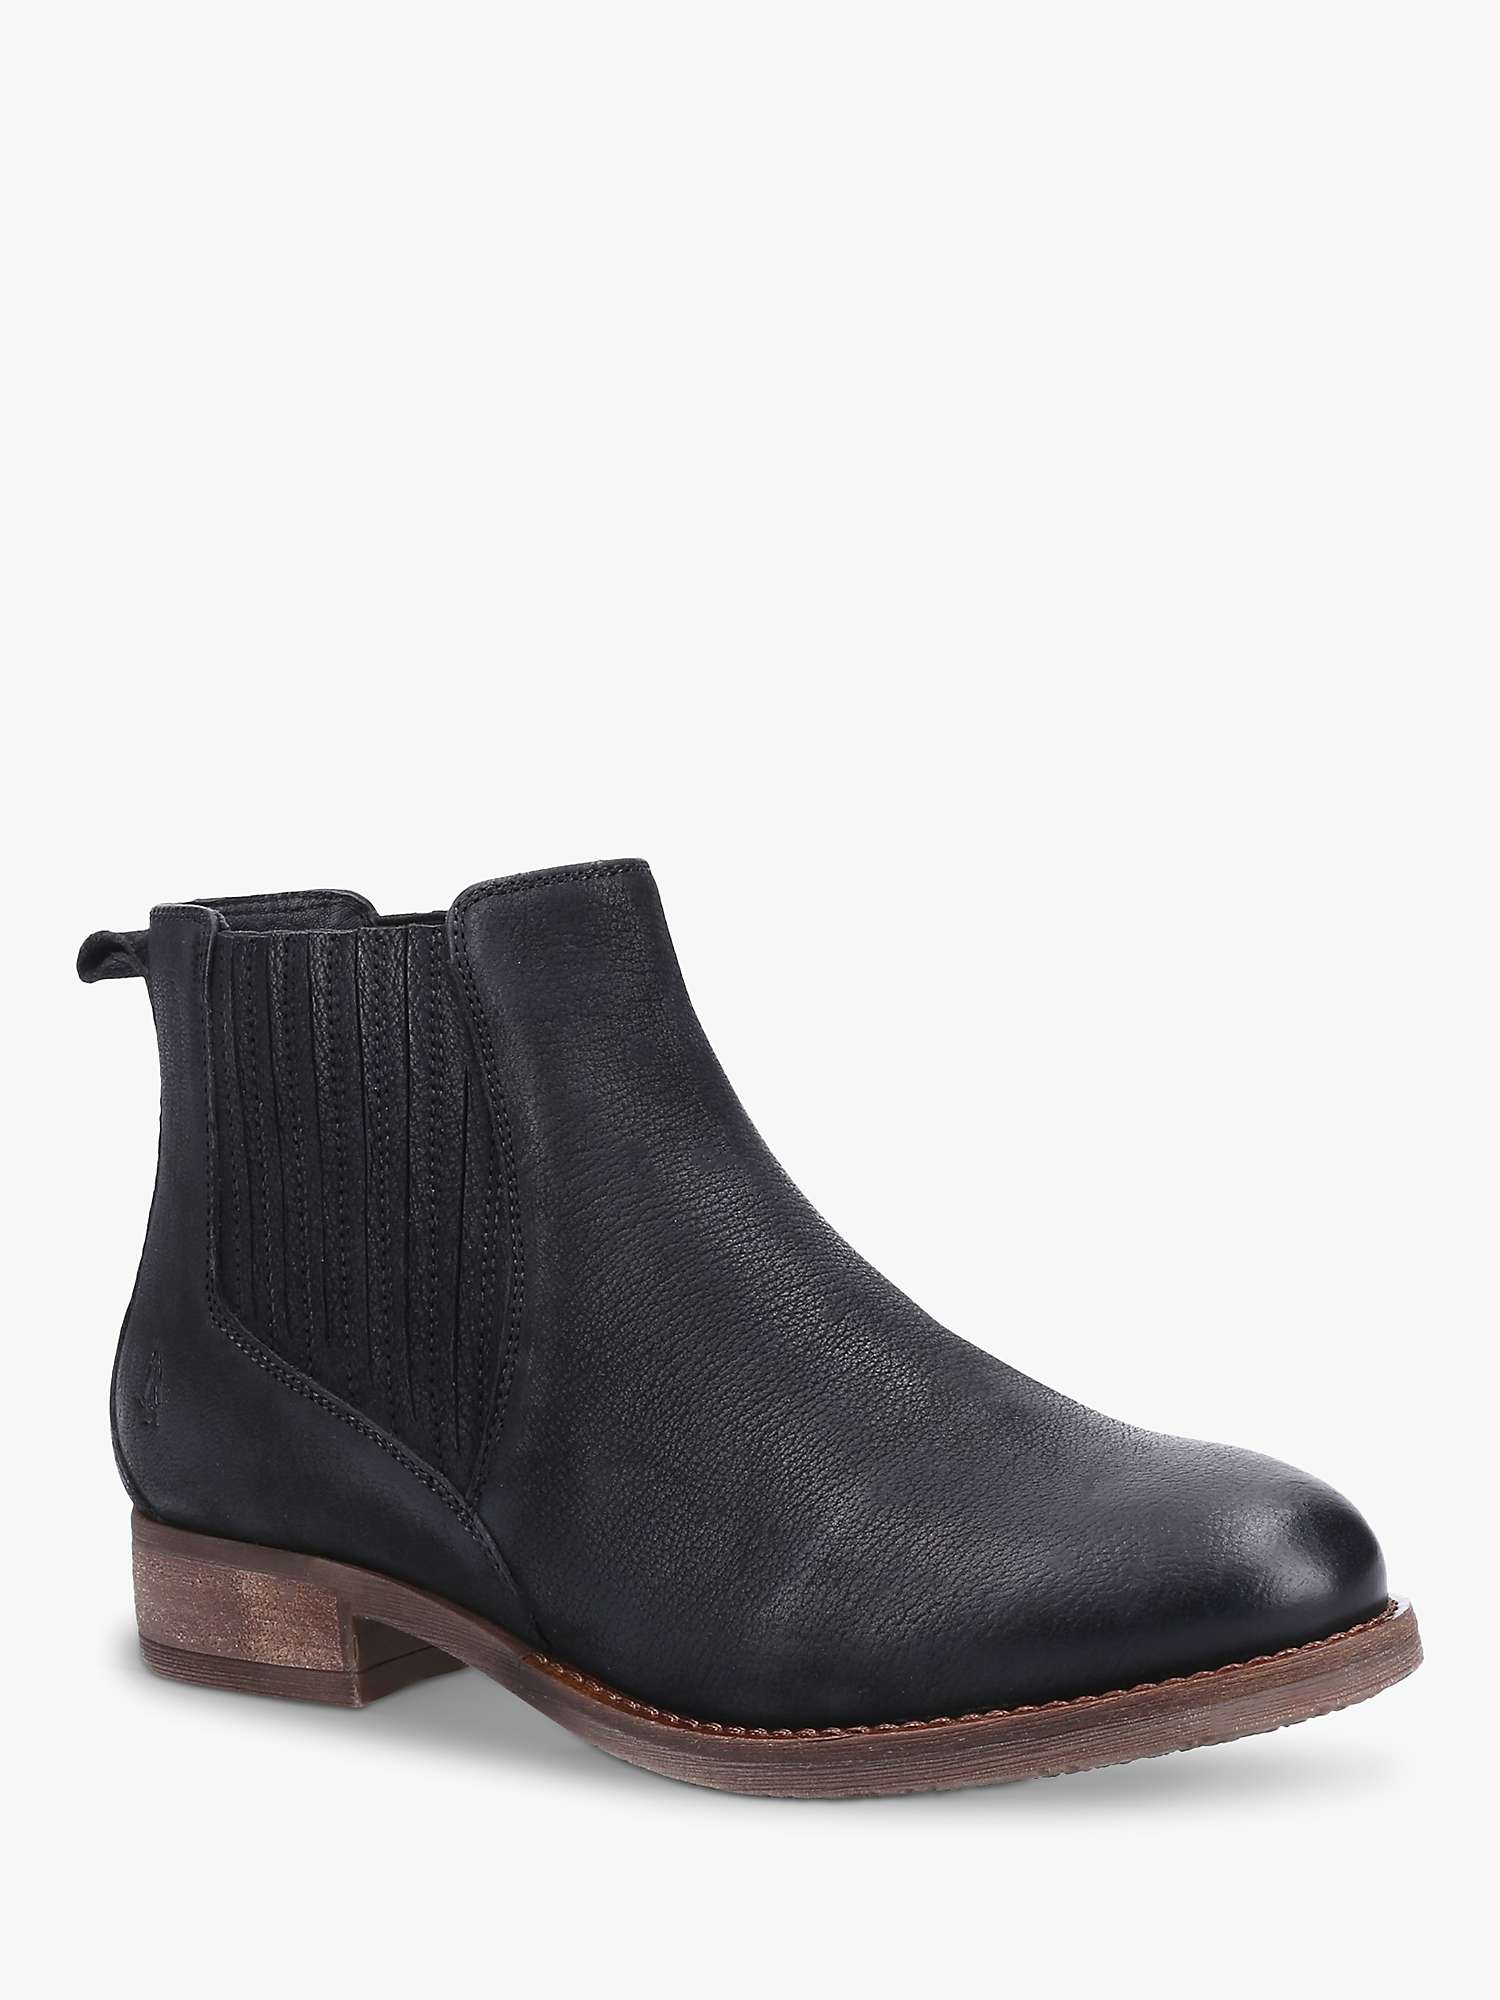 collar Melancholy Laughter Hush Puppies Edith Leather Ankle Boots, Black at John Lewis & Partners